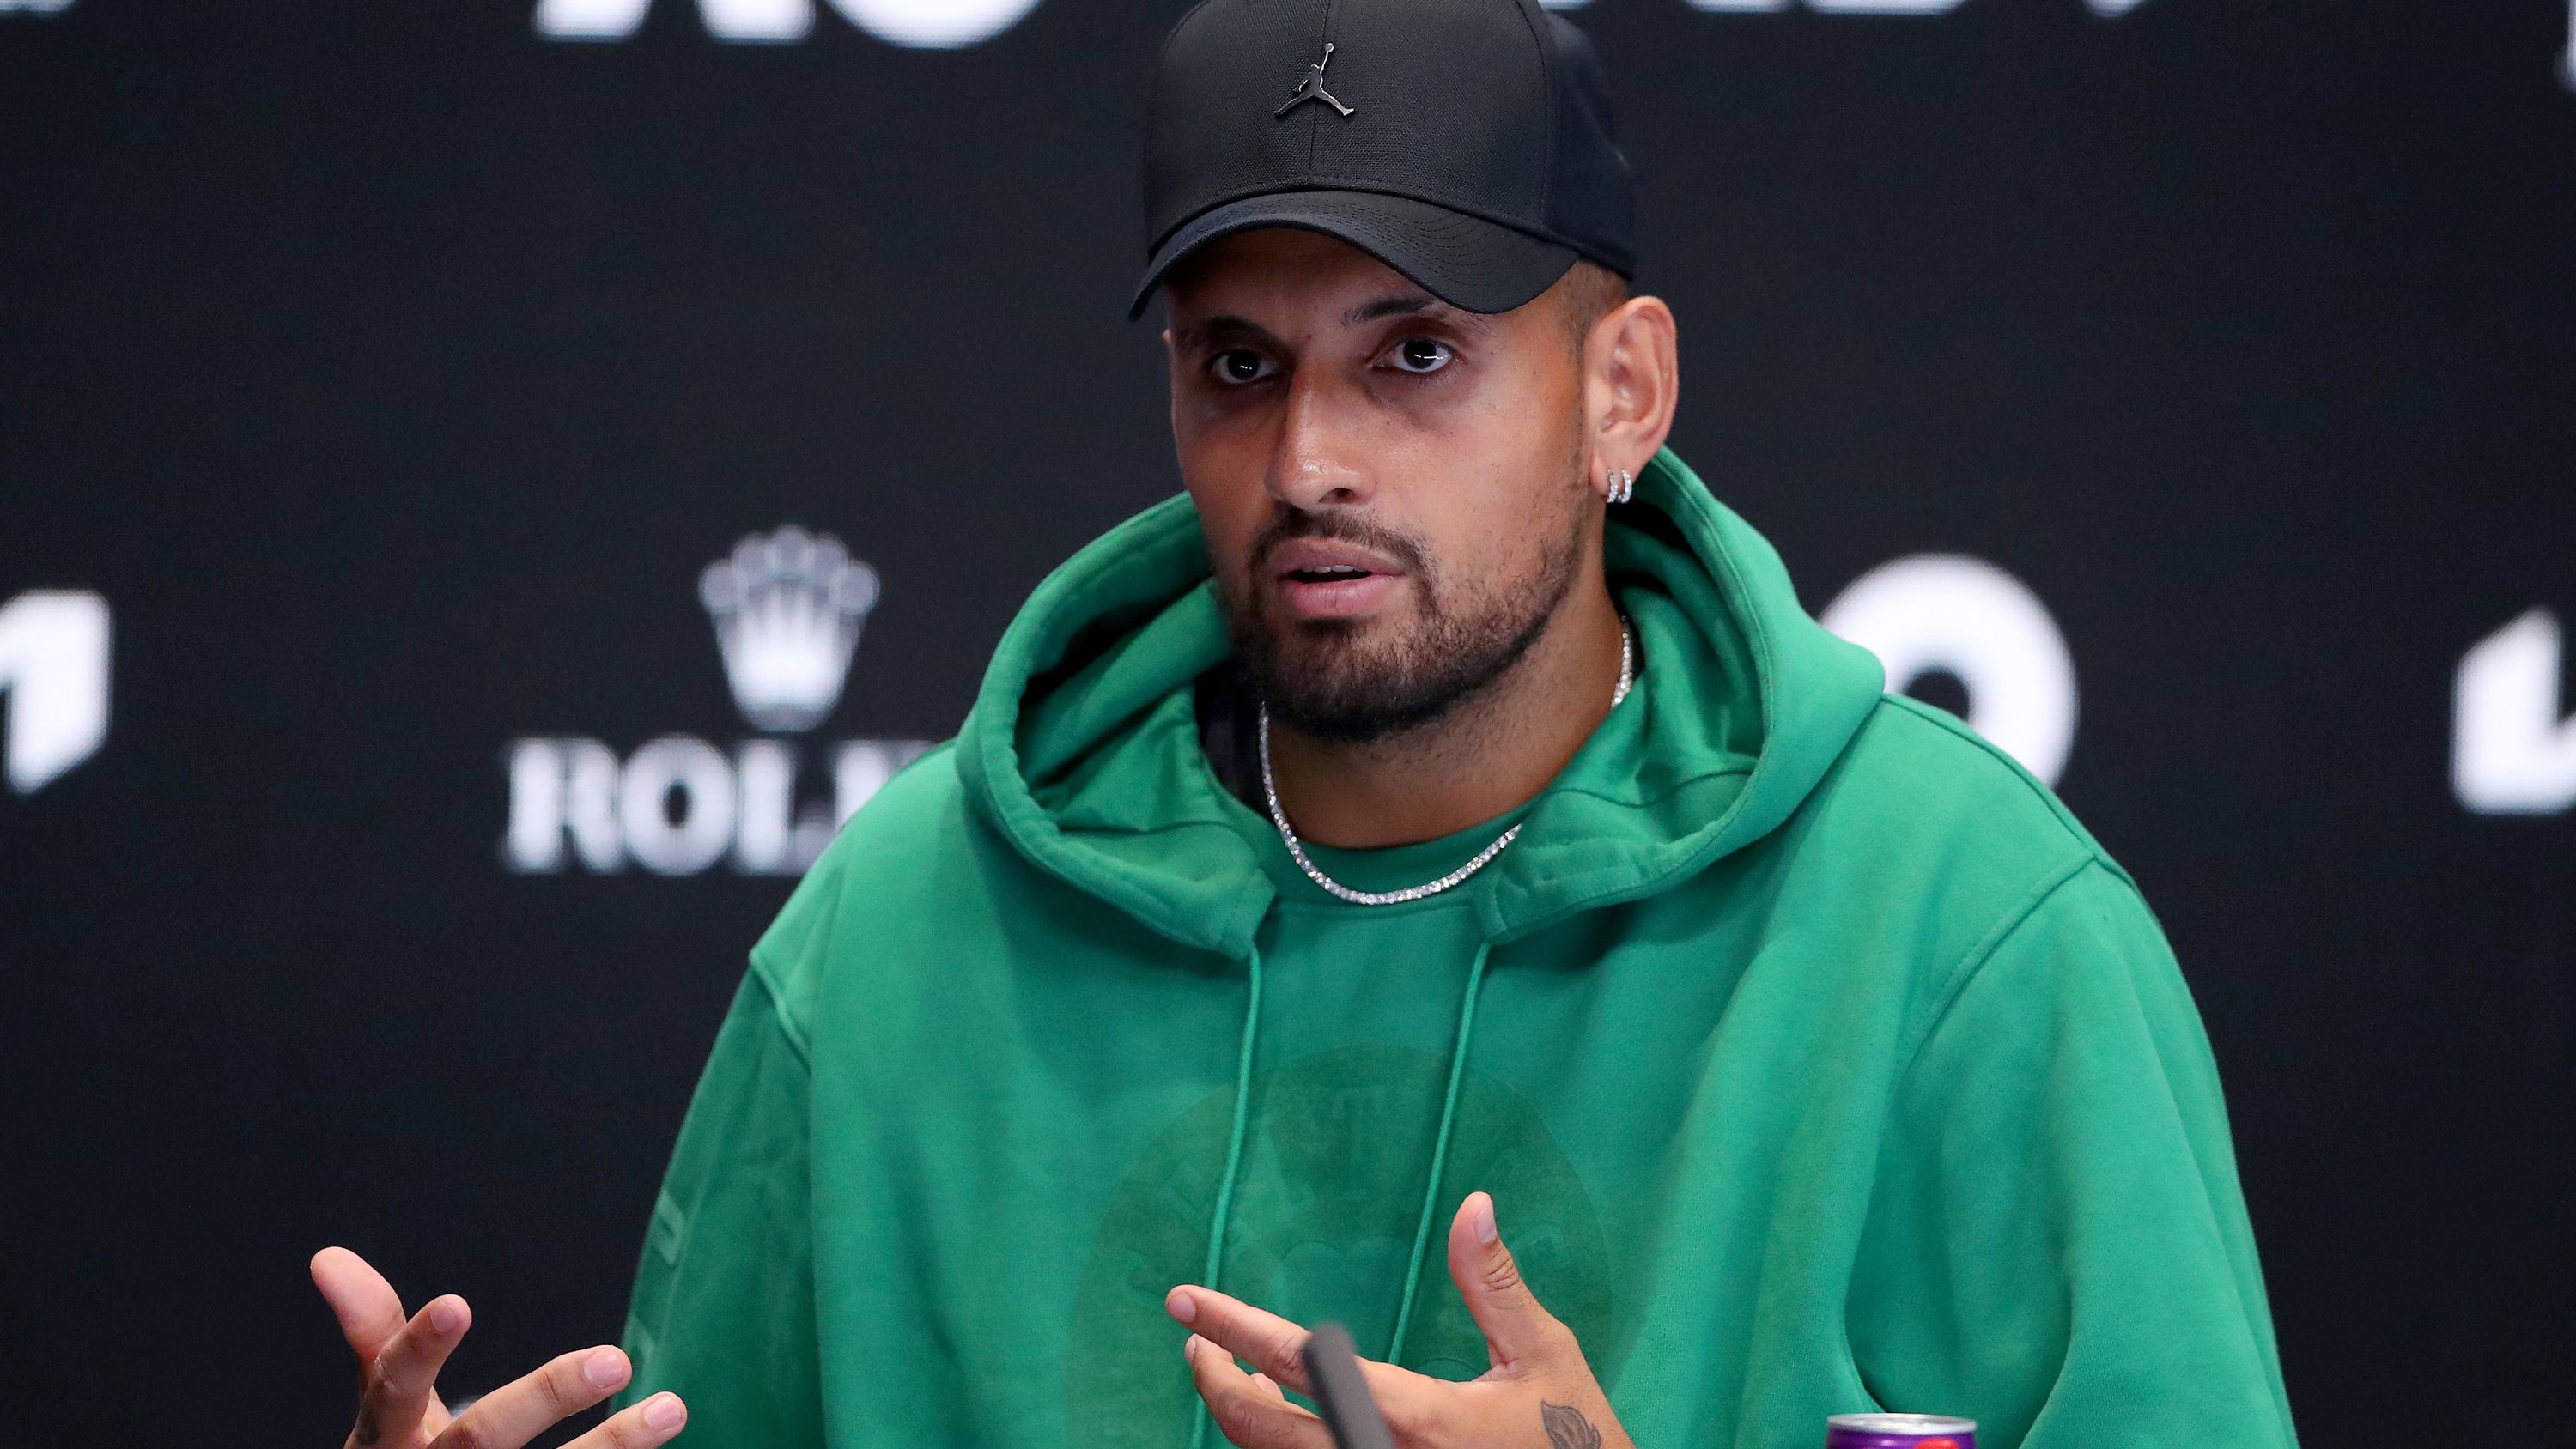 MELBOURNE, AUSTRALIA - JANUARY 14: Nick Kyrgios of Australia speaks during a press conference during a practice session ahead of the 2023 Australian Open at Melbourne Park on January 14, 2023 in Melbourne, Australia. (Photo by Kelly Defina/Getty Images)